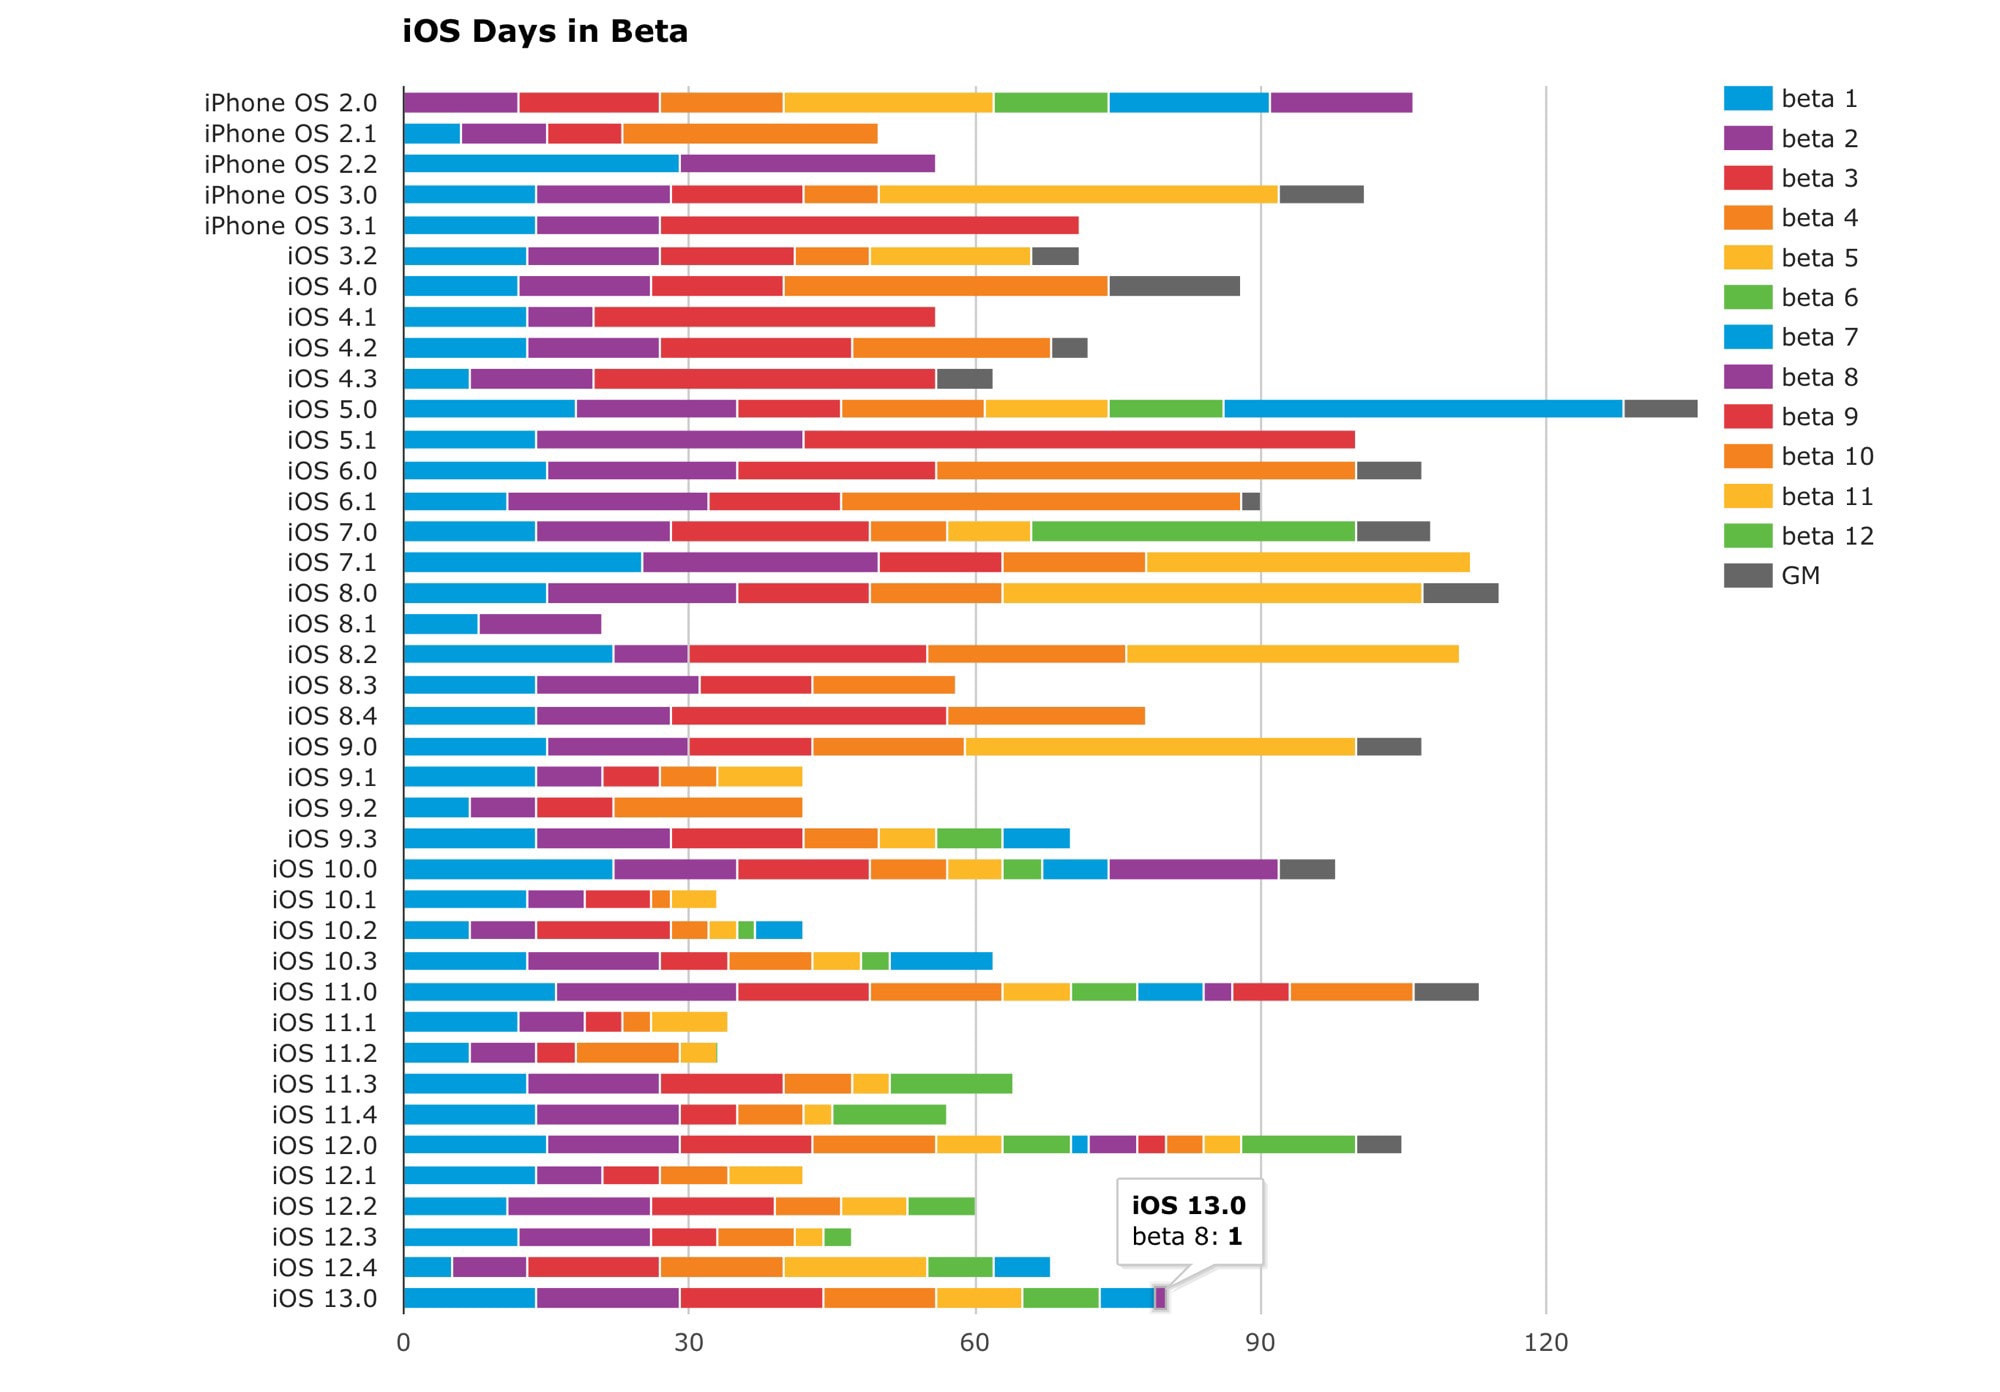 iOS Days in Beta chart: Will Hains' excellent chart breaks down the iOS betas.